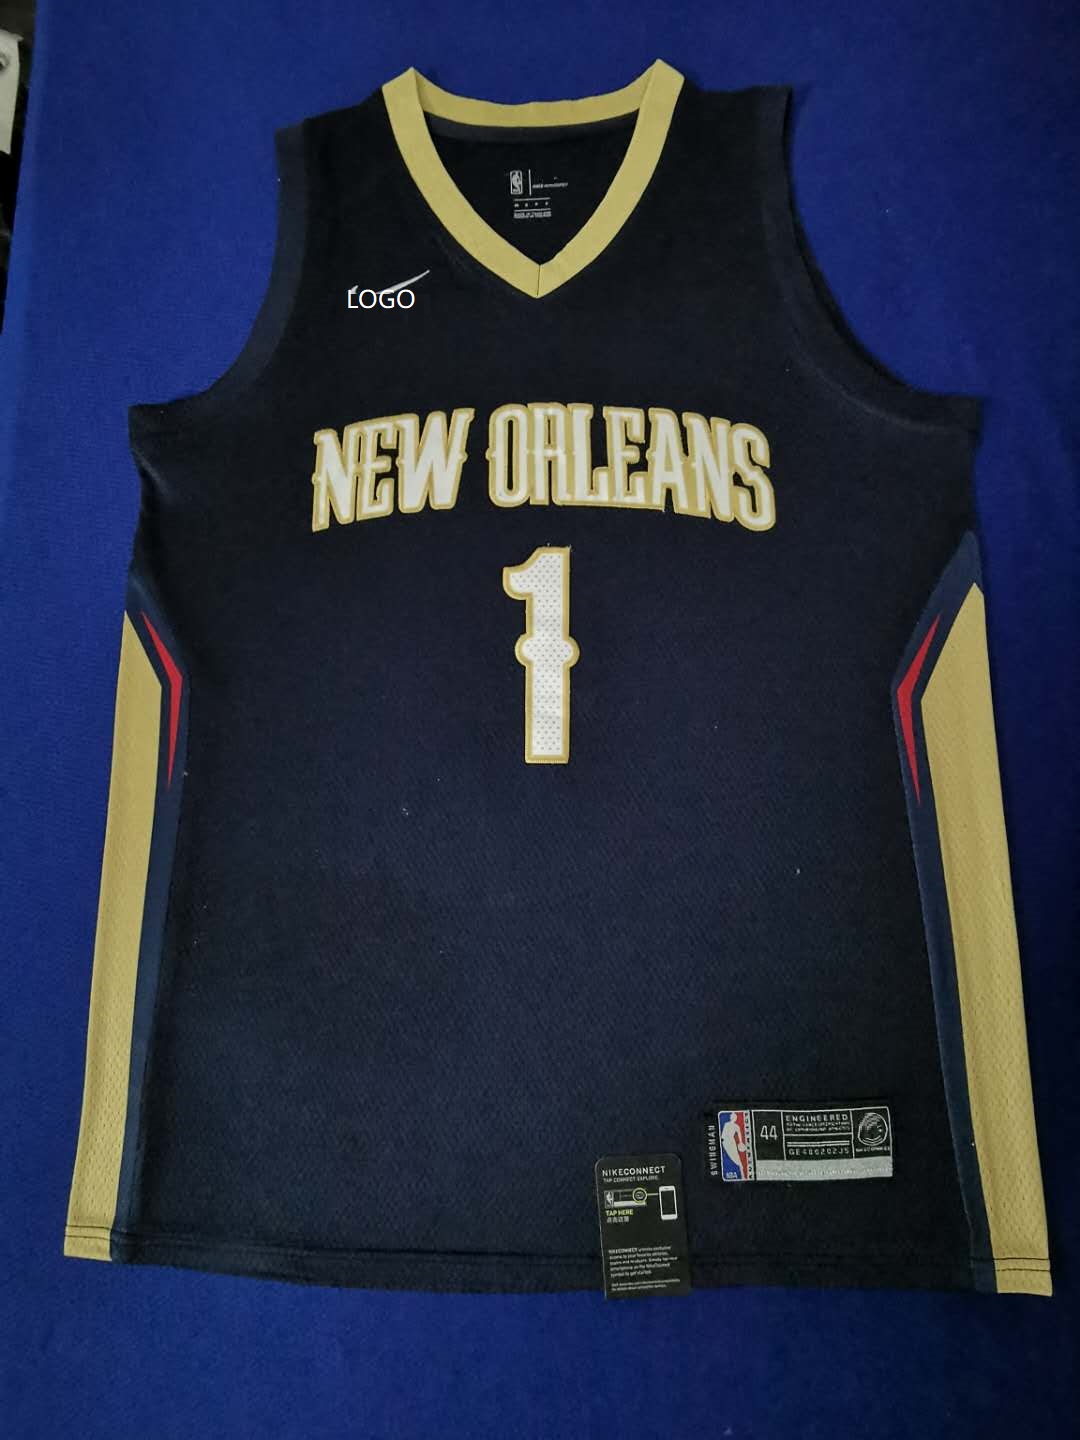 new orleans jersey 2019